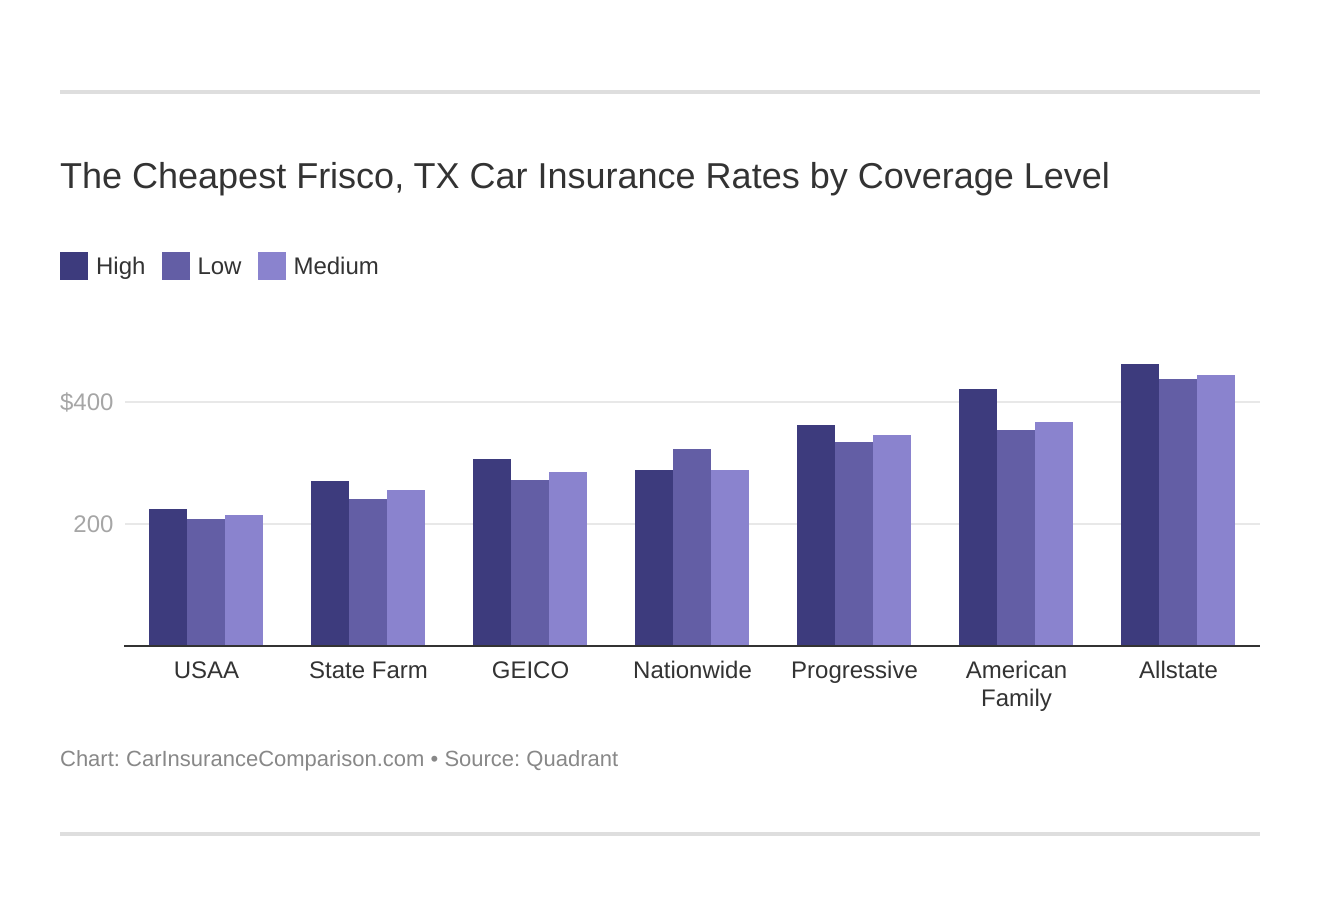 The Cheapest Frisco, TX Car Insurance Rates by Coverage Level